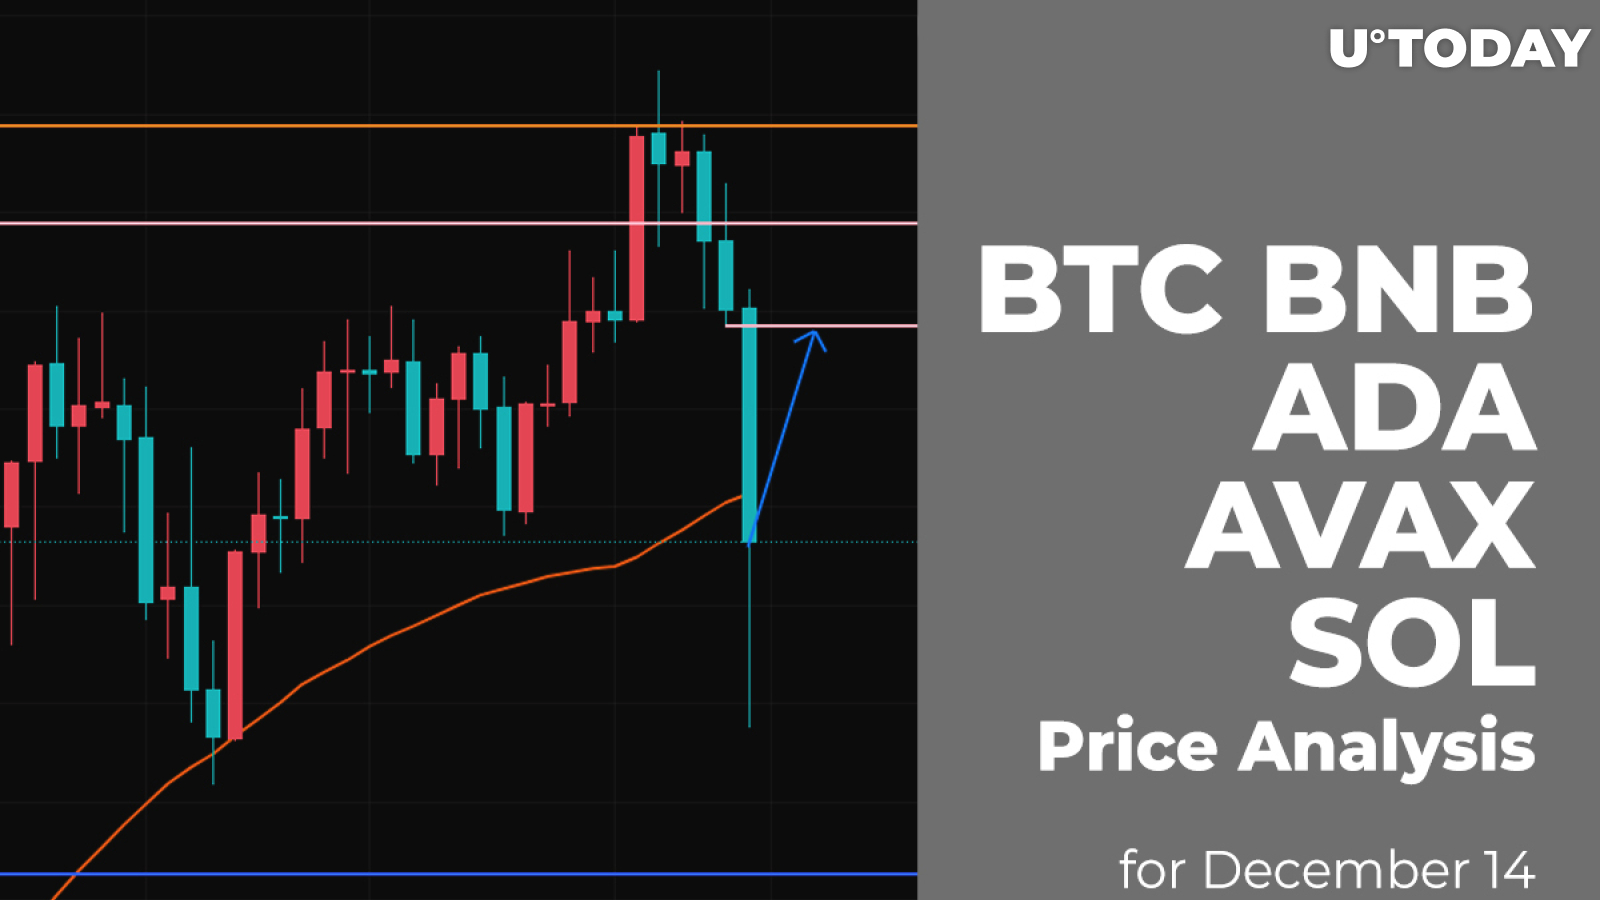 BTC, BNB, ADA, AVAX and SOL Price Analysis for December 14